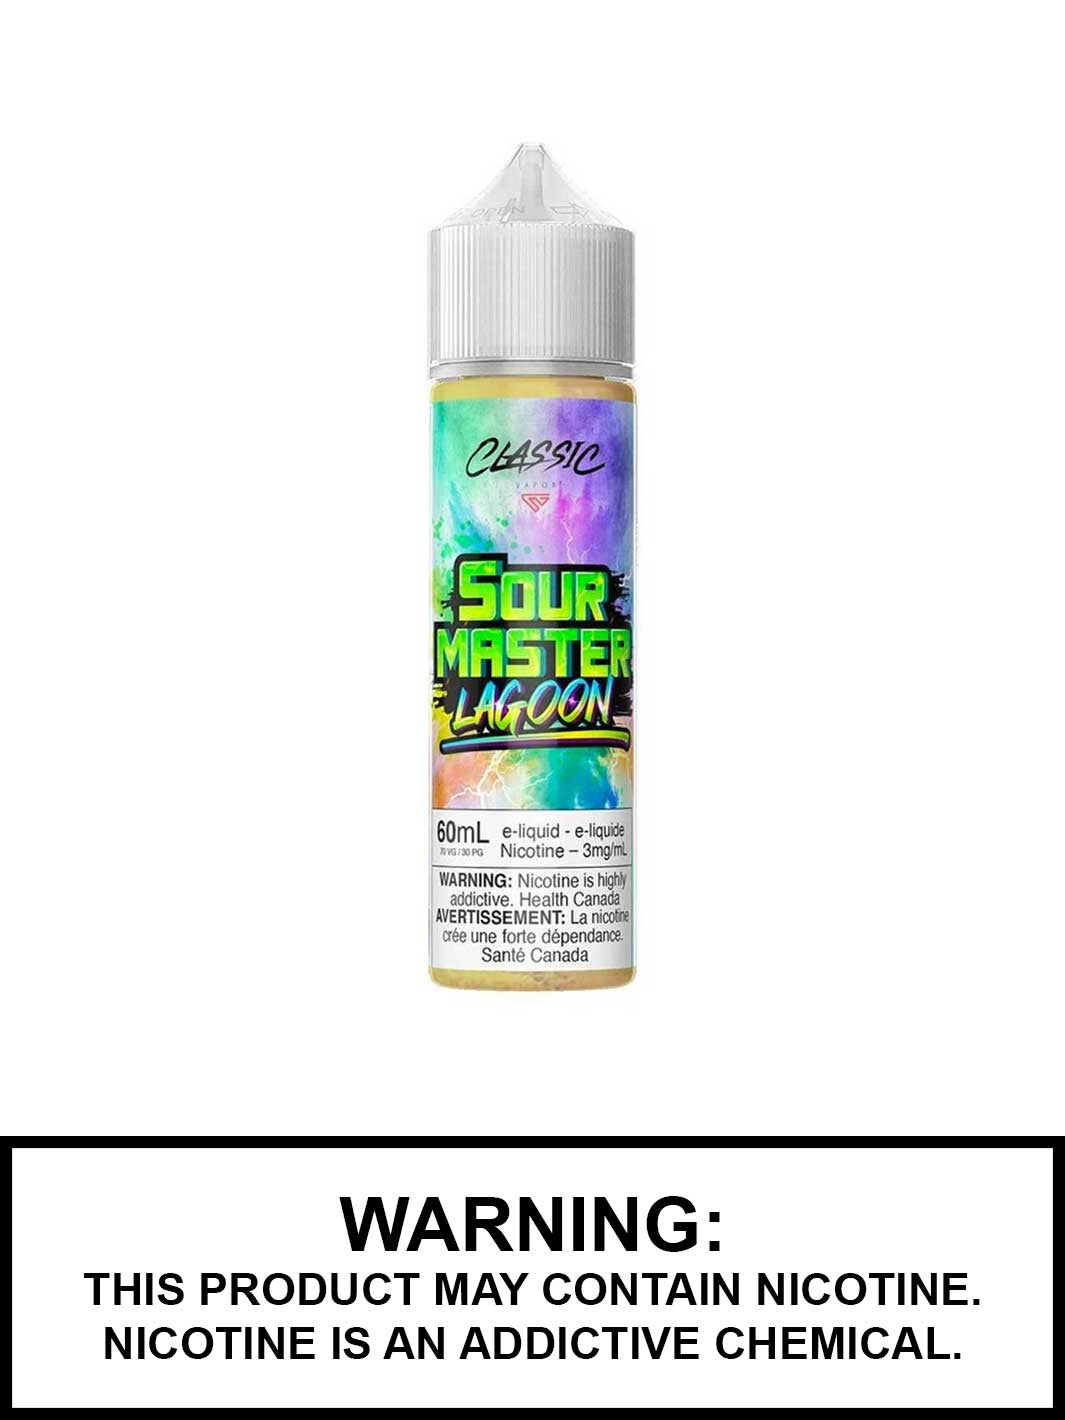 Lagoon eJuice by Sour Master, Cherry Lime Blueberry Apple eJuice, Vape360 Canada